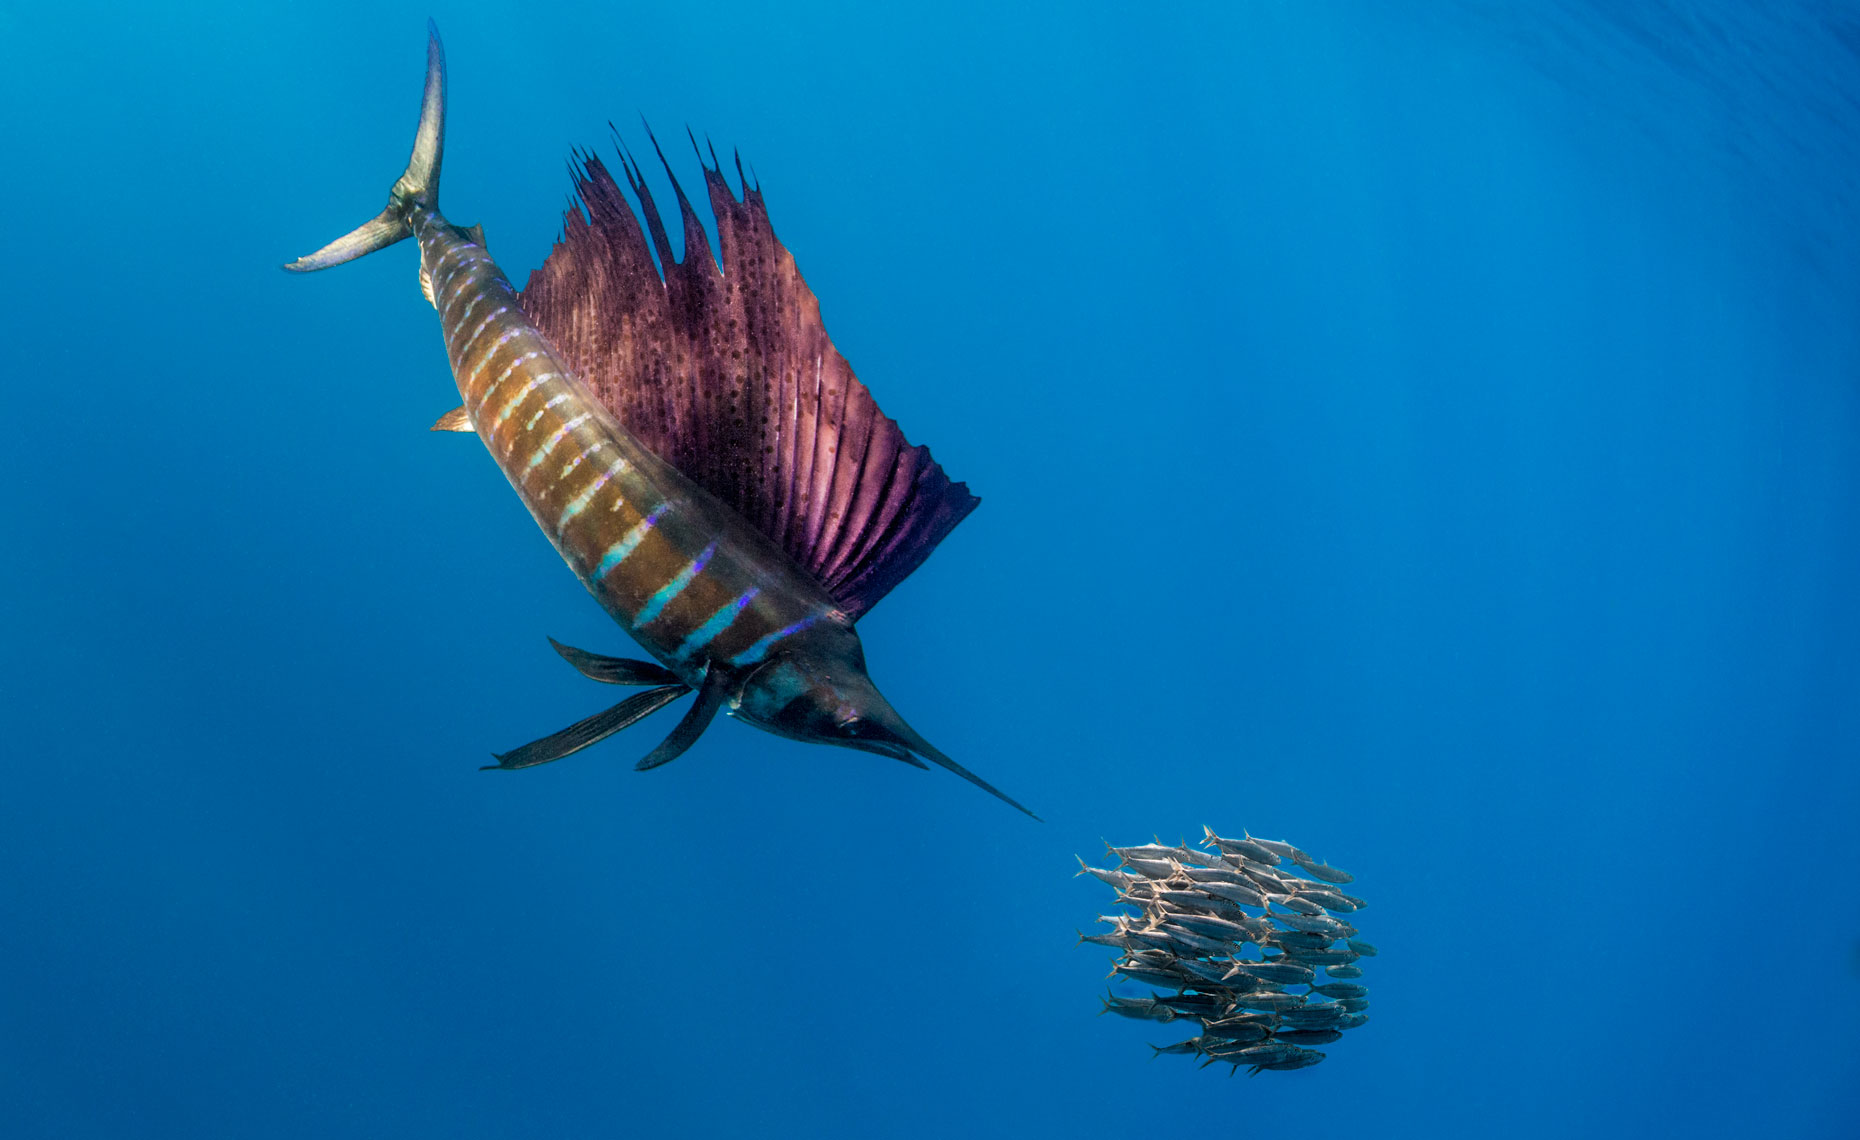 A Sailfish tracking a school of small fish while being tracked by men in fishing shirts